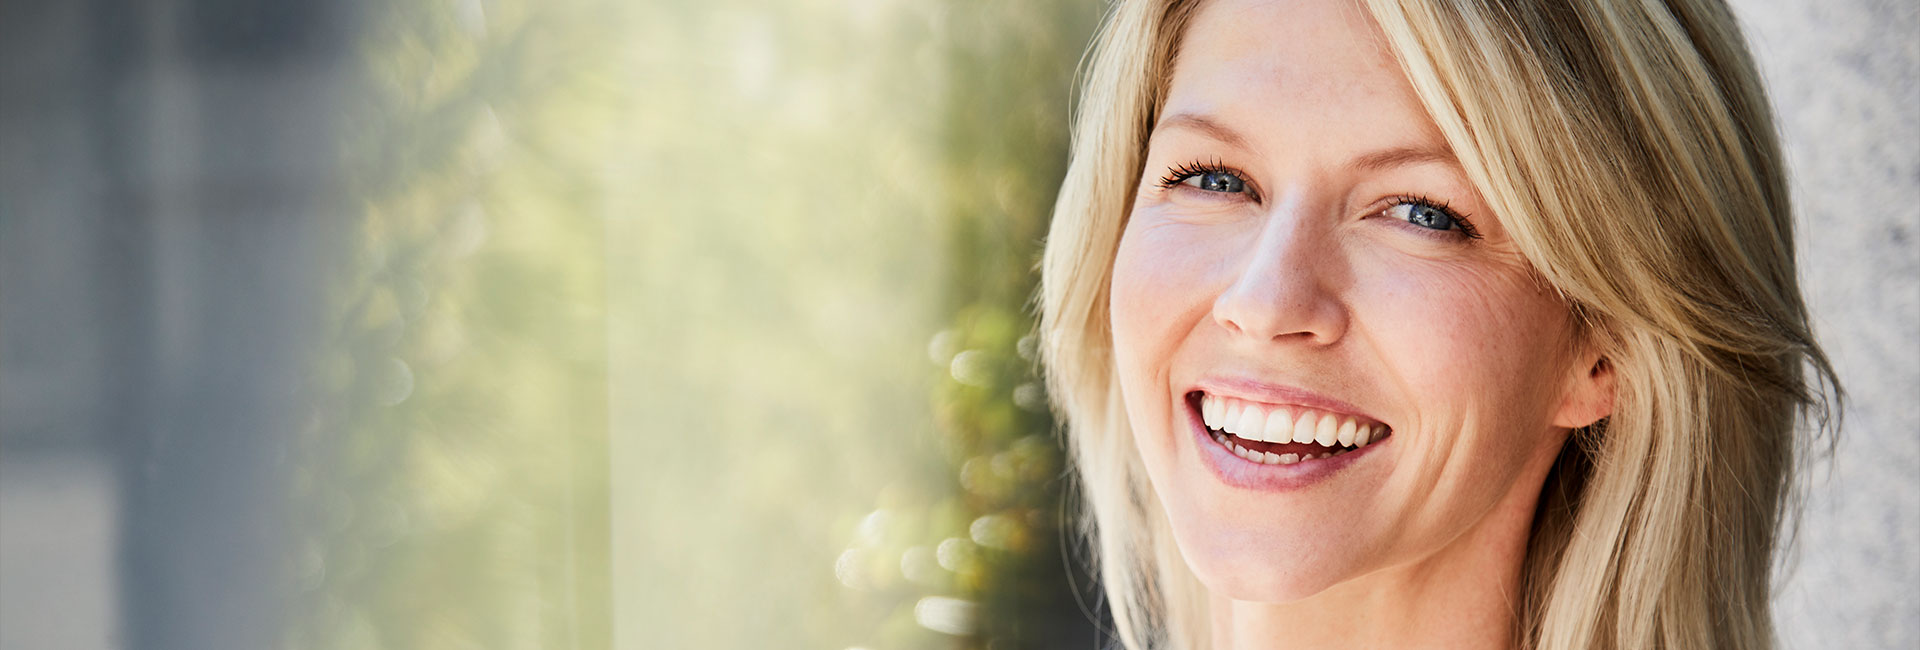 Beautiful woman smiling after teeth whitening